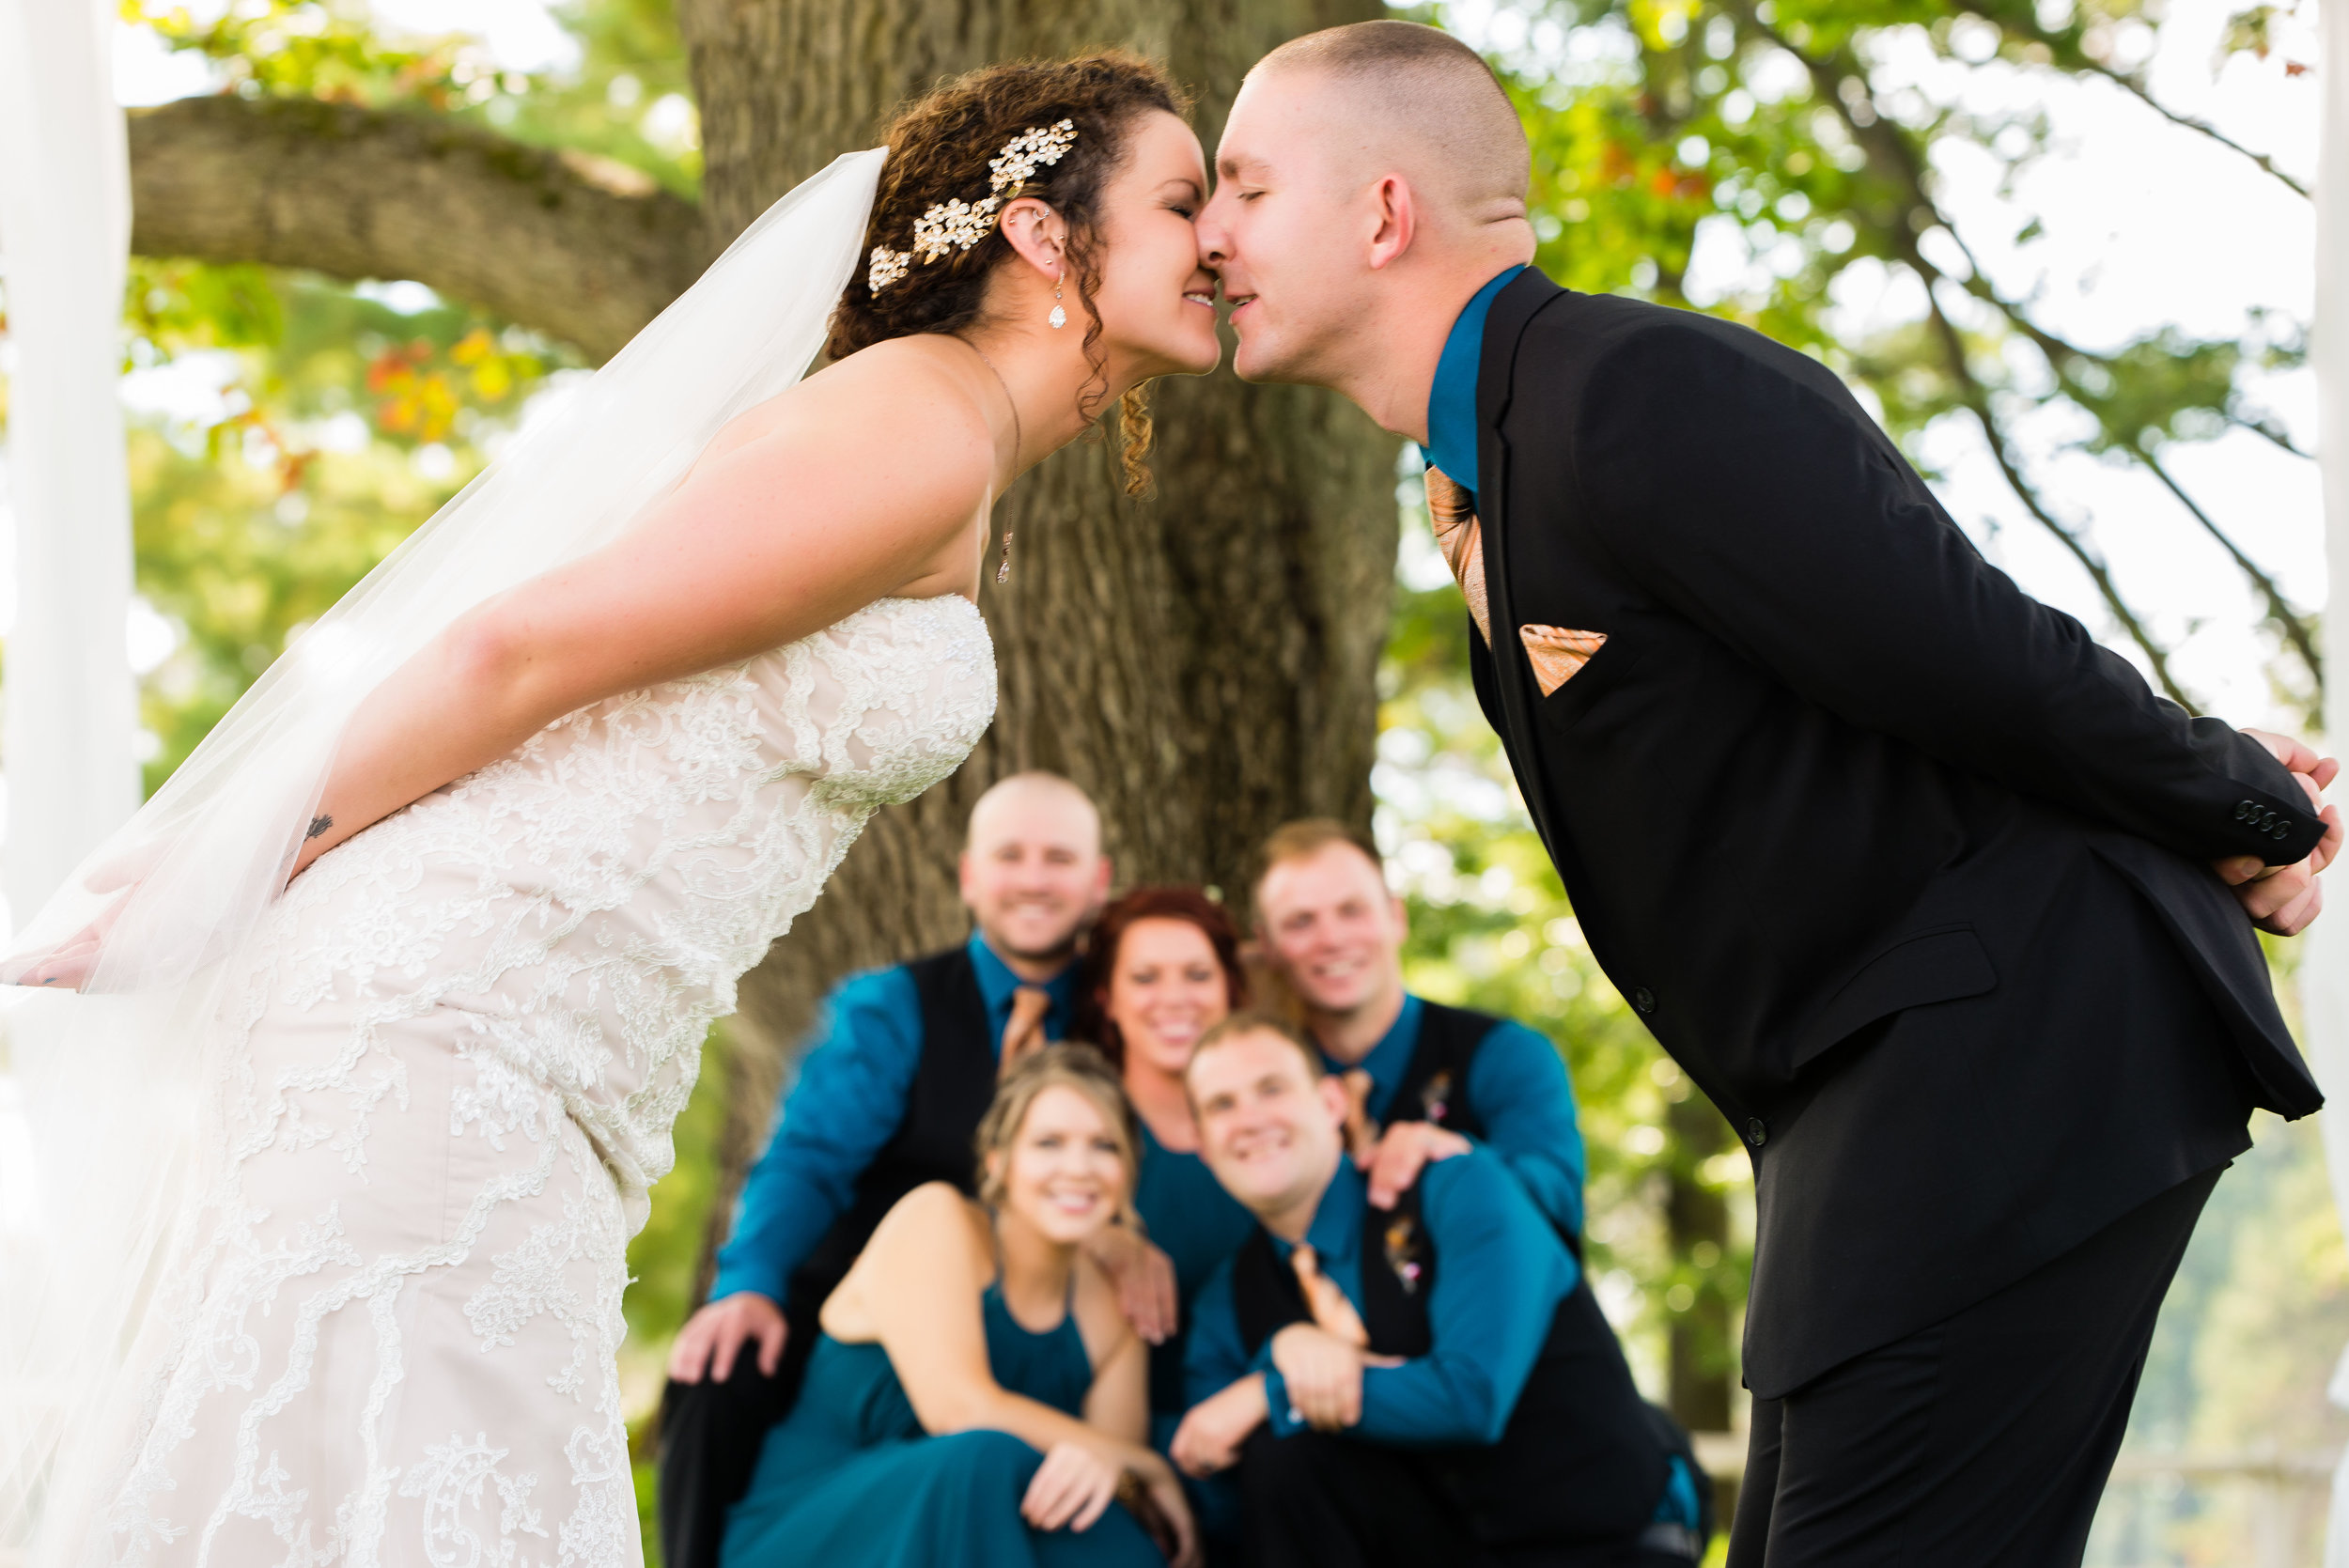 Newlyweds Kiss with Bridal Party in Background